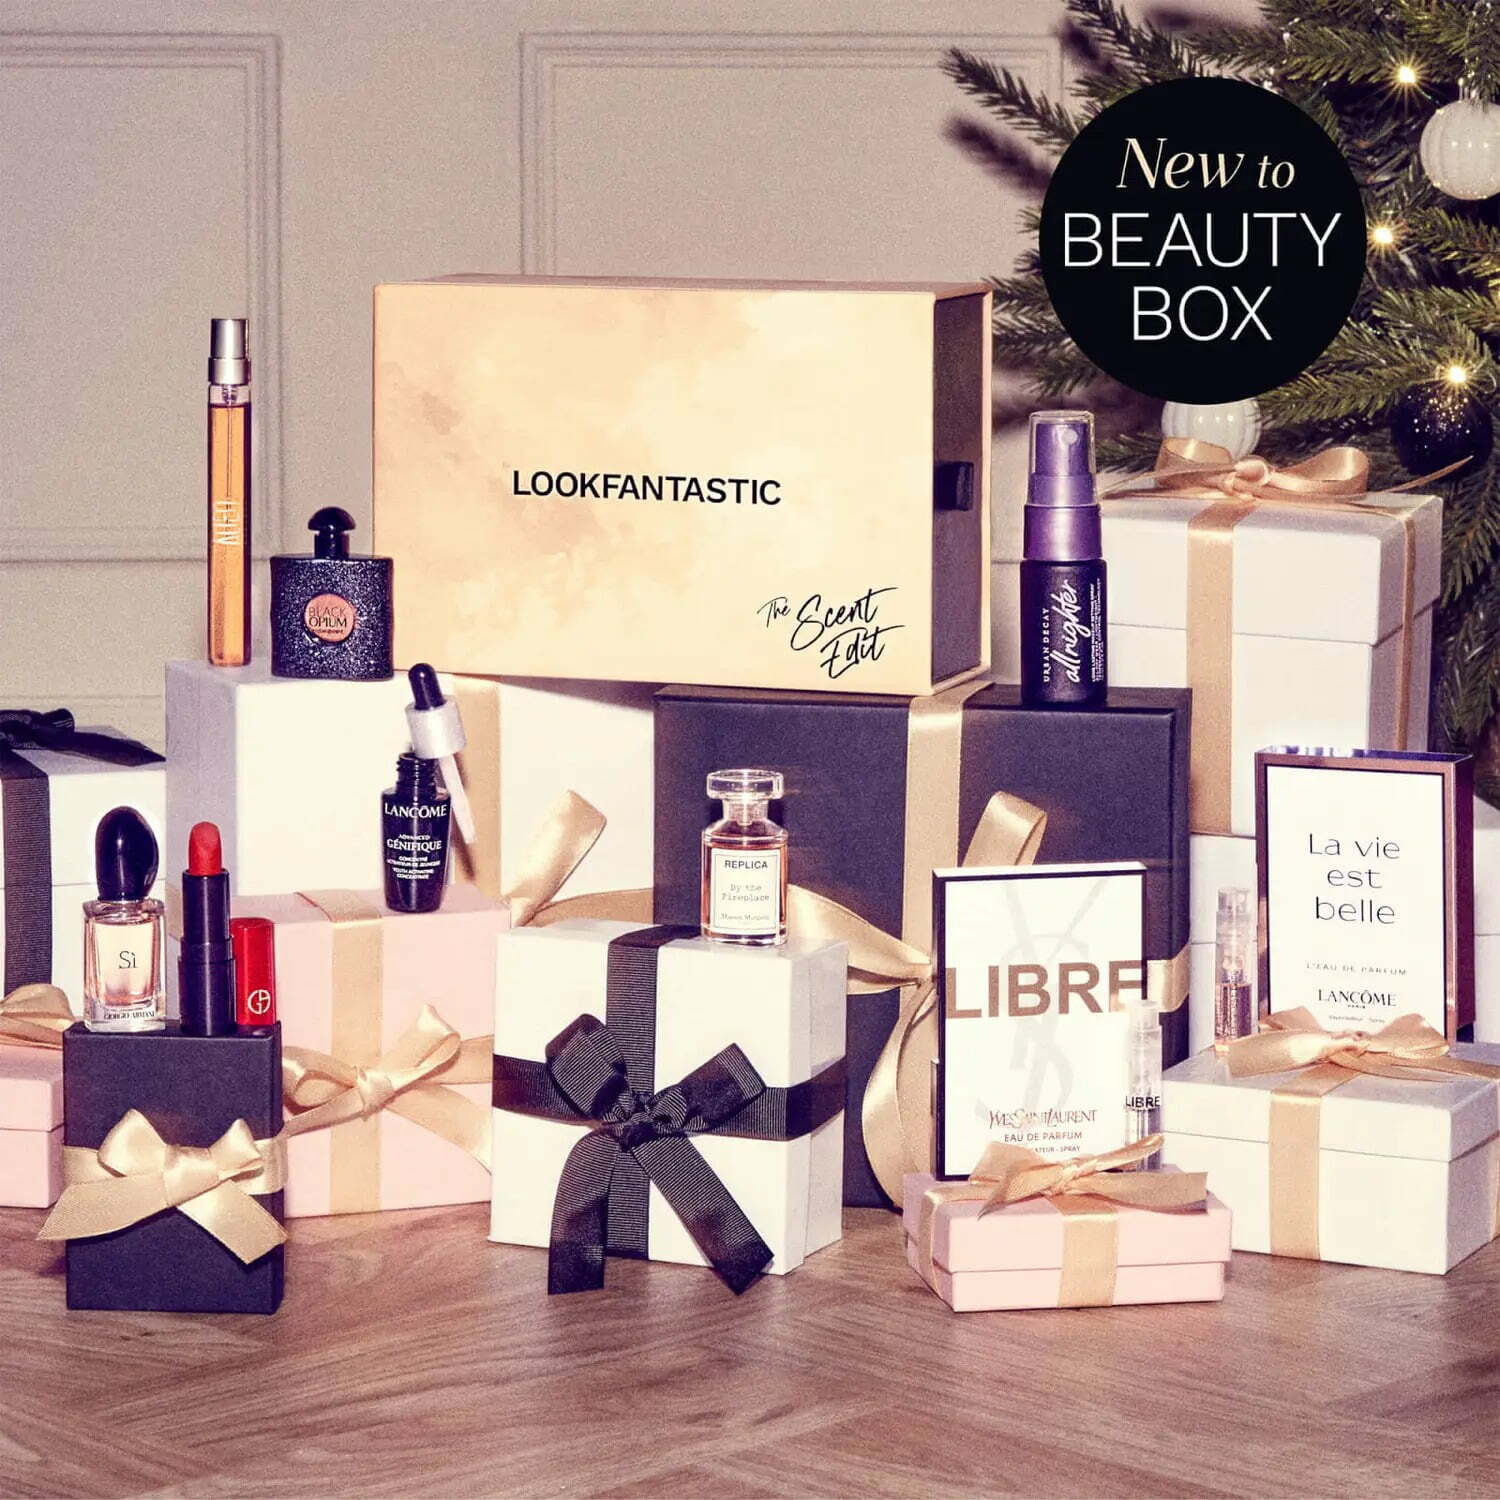 LOOKFANTASTIC X Festive Scent Edit For Her